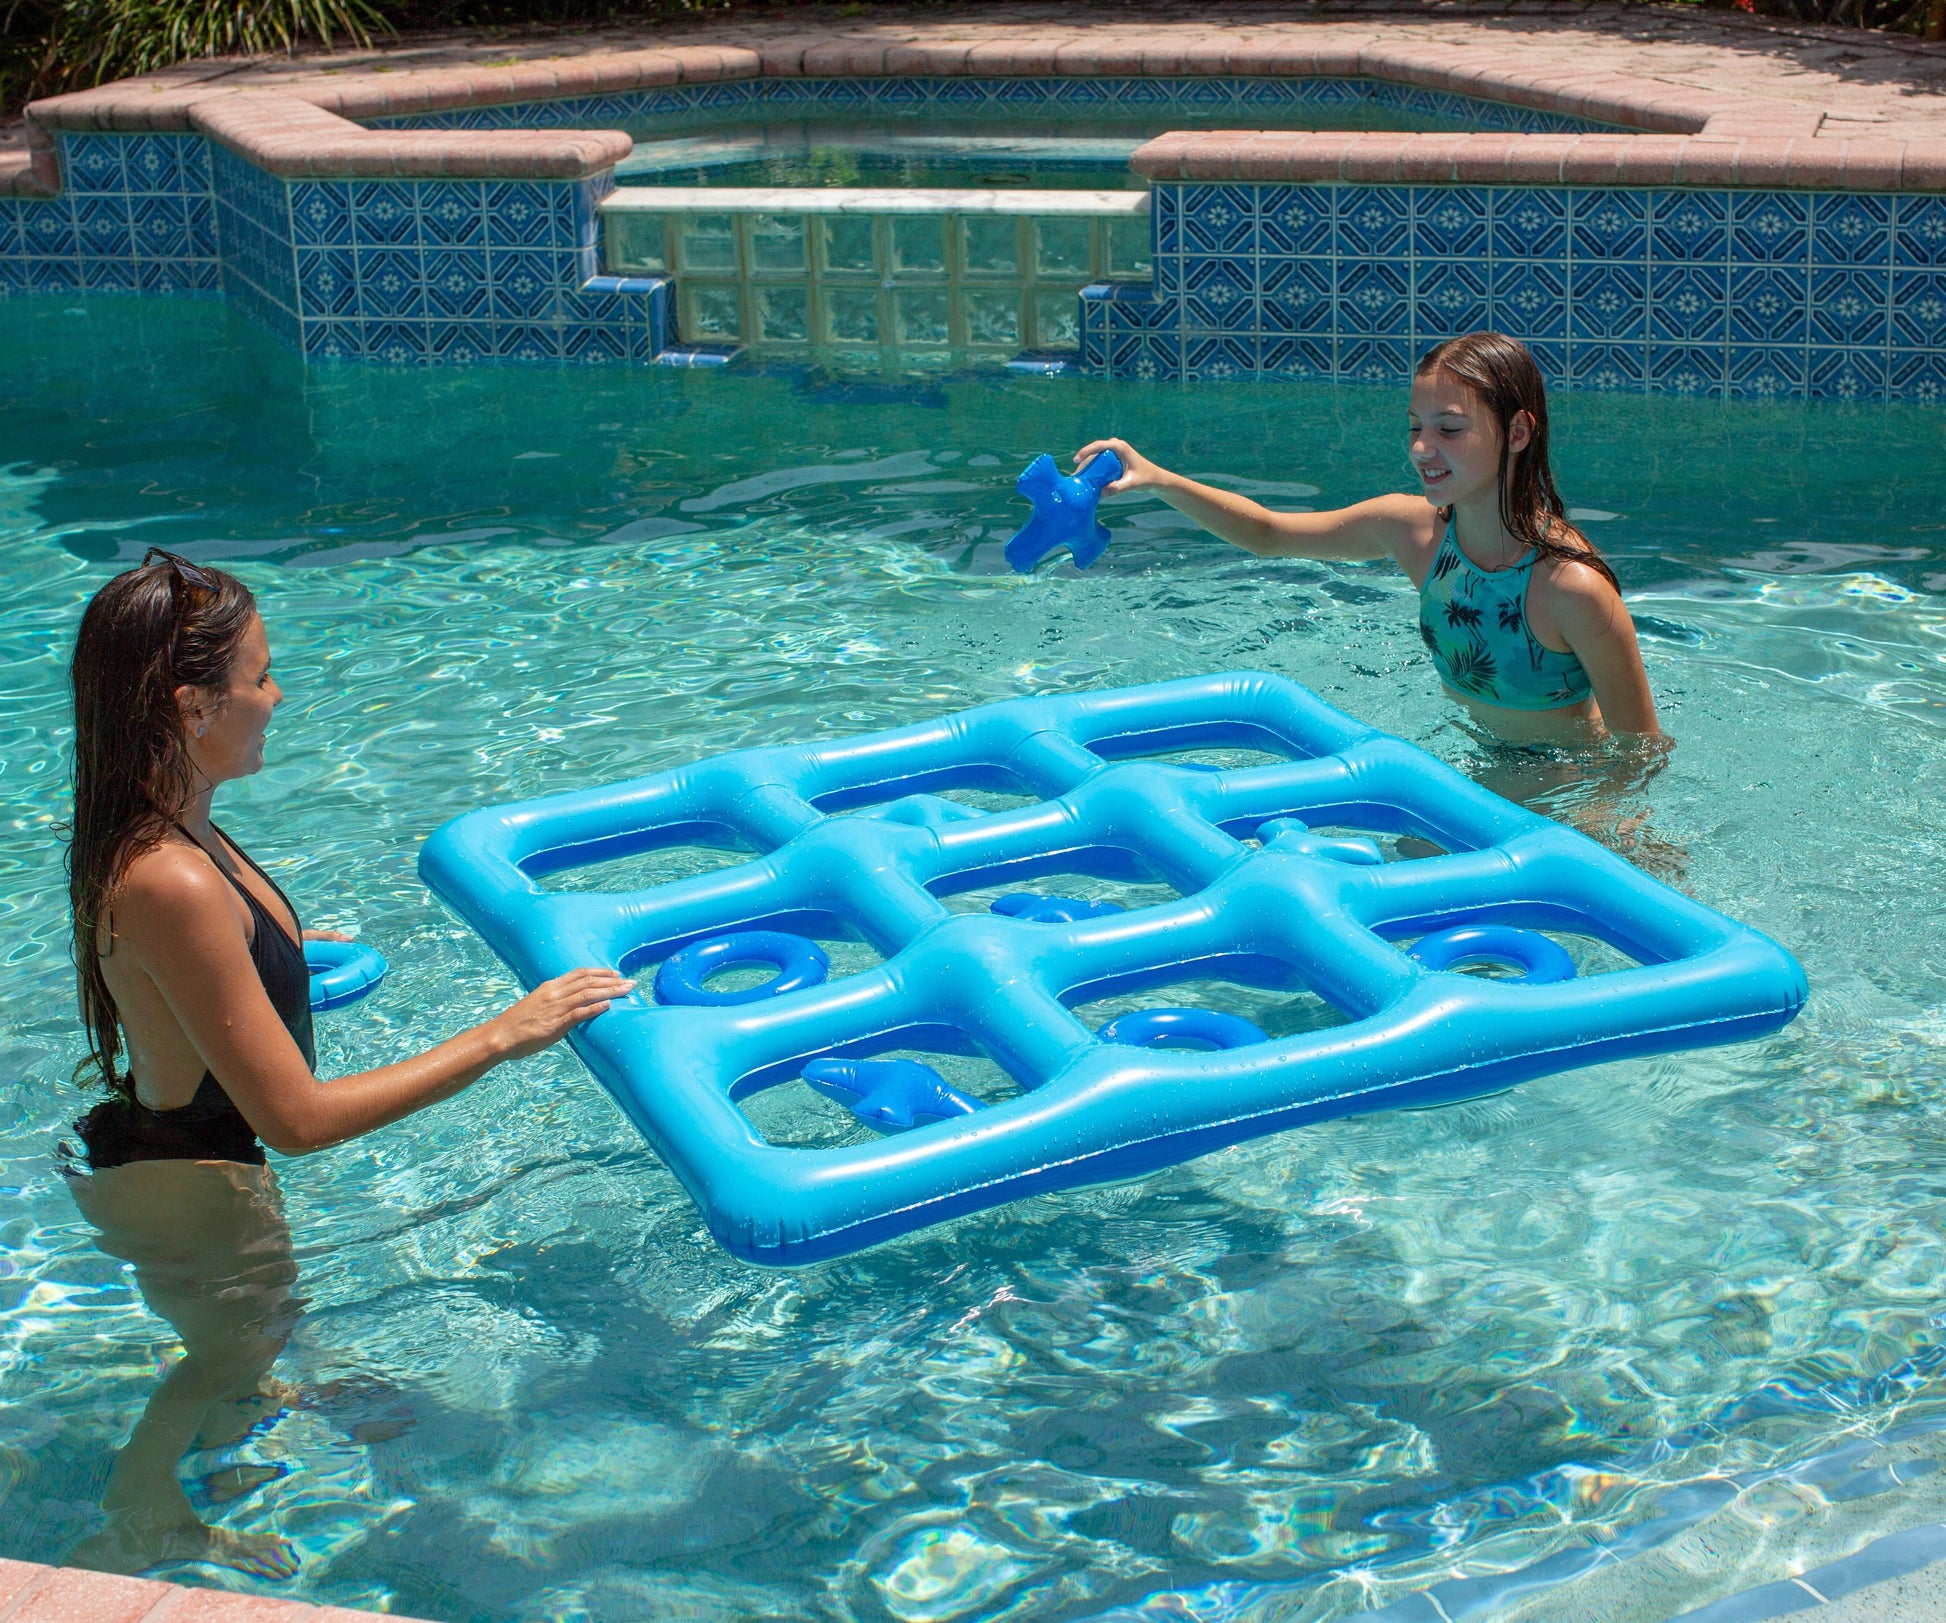 KOVOT Inflatable Tic Tac Toe Floating Game – Pool Fun Indoor and Outdoor  Game Set for The Entire Family - Backyard, Pool, Picnic, Playroom, Beach